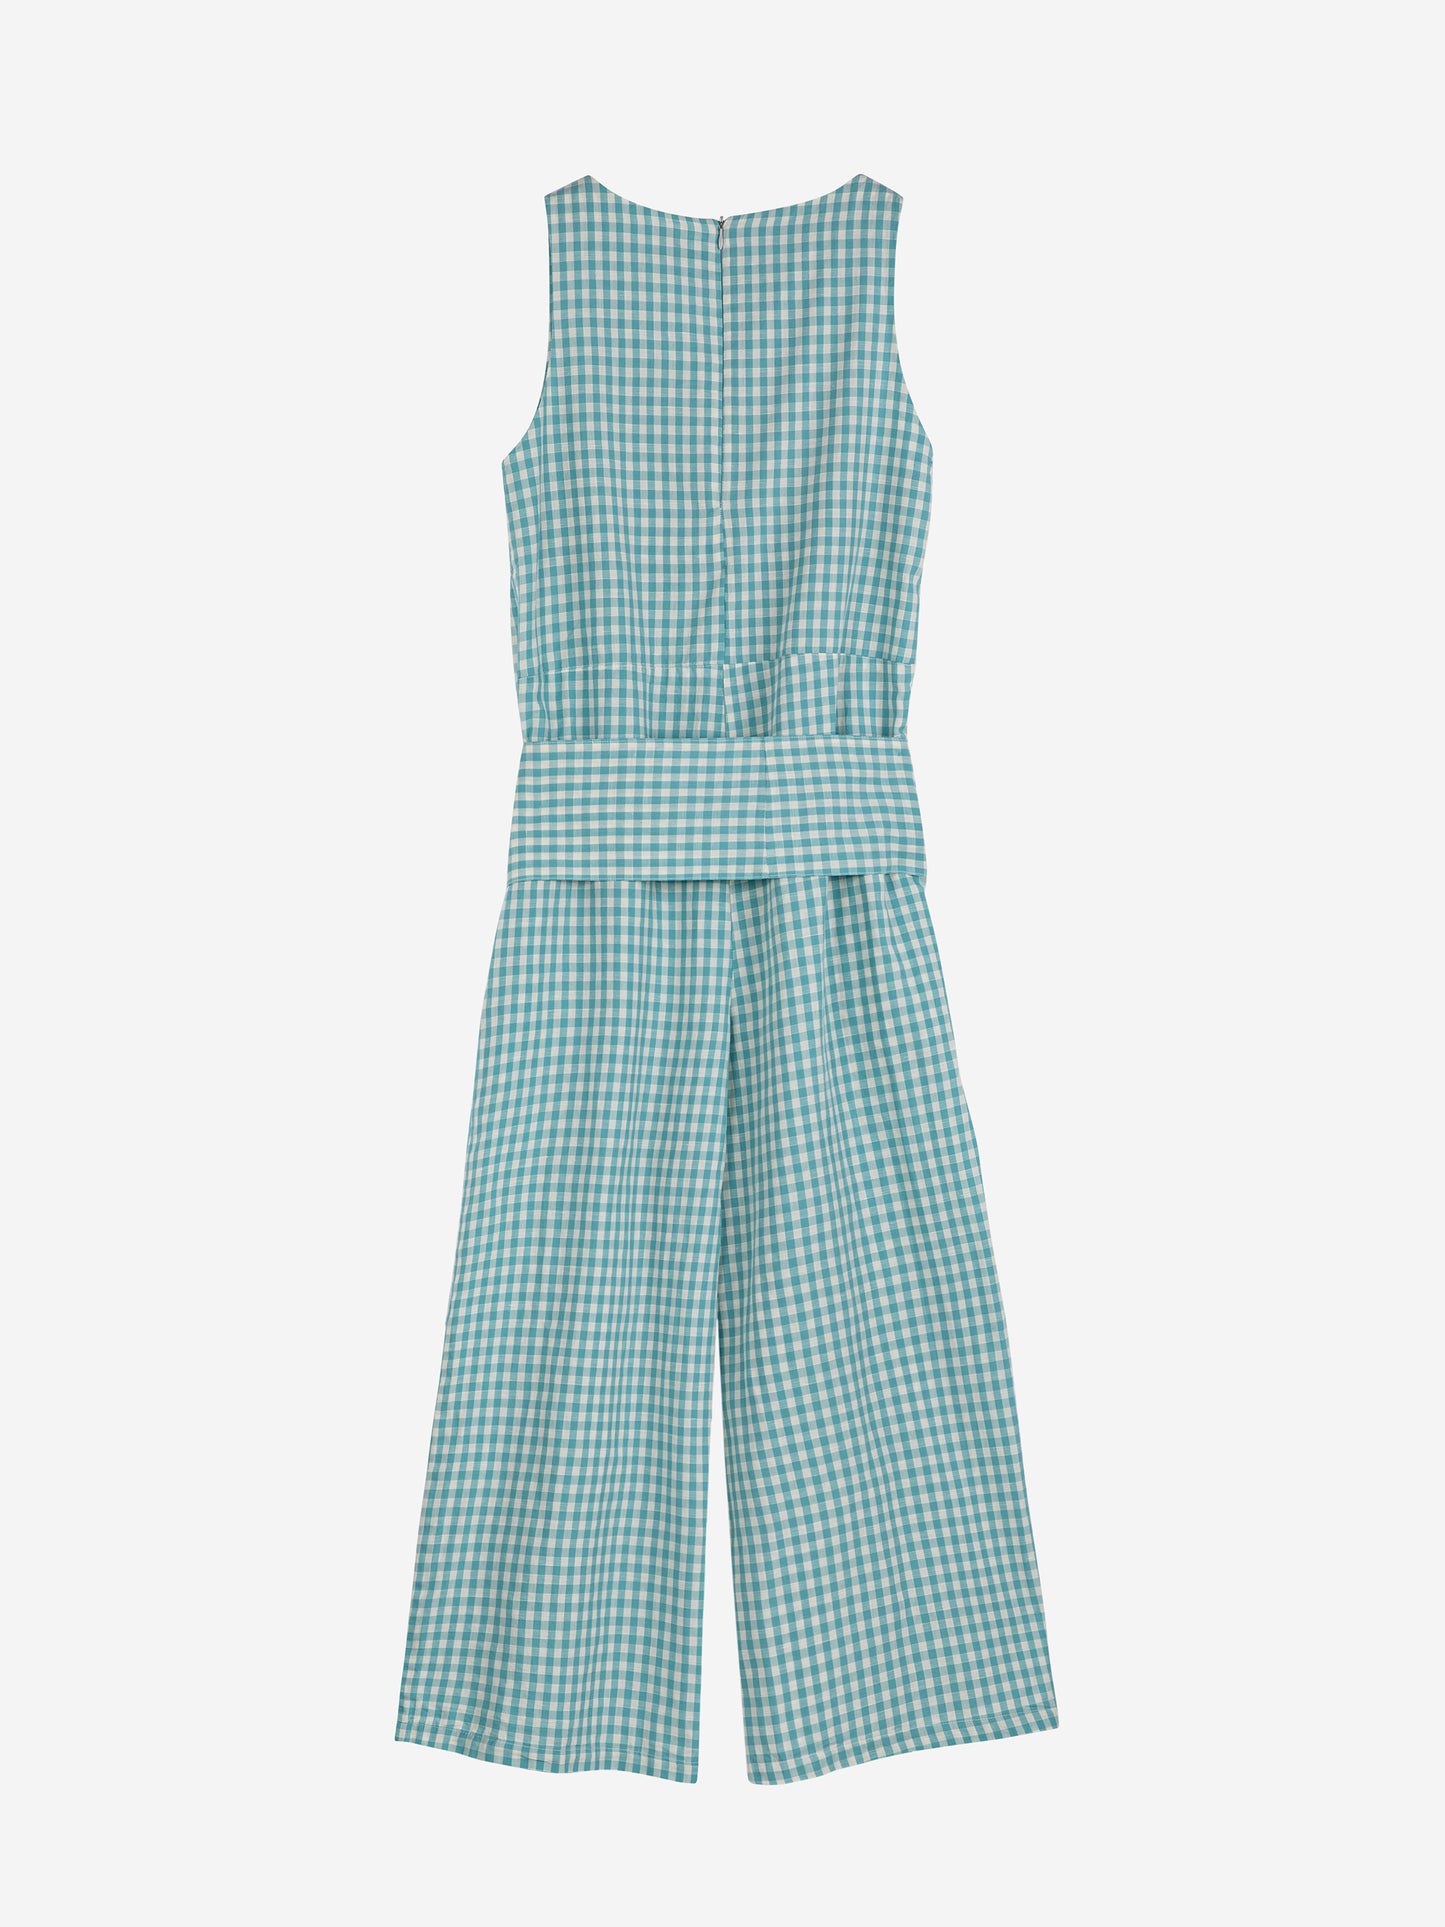 VICHY V-NECK SLEEVELESS OVERALL 124AD091 TURQUOISE